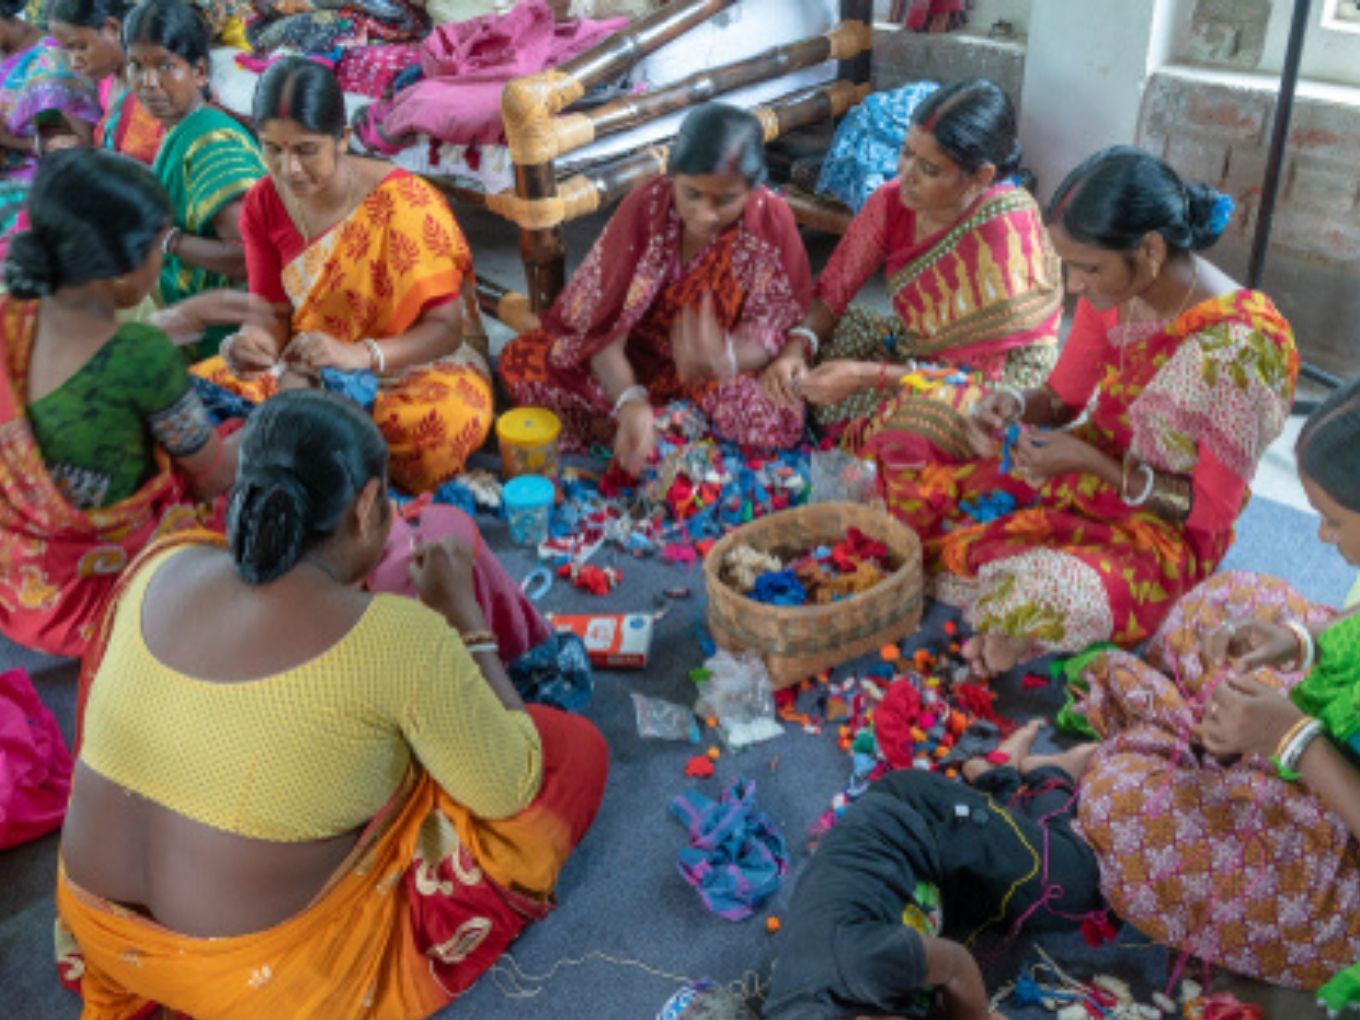 Mahindra Finance To Aid Women-Owned MSMEs With $200 Mn Fund